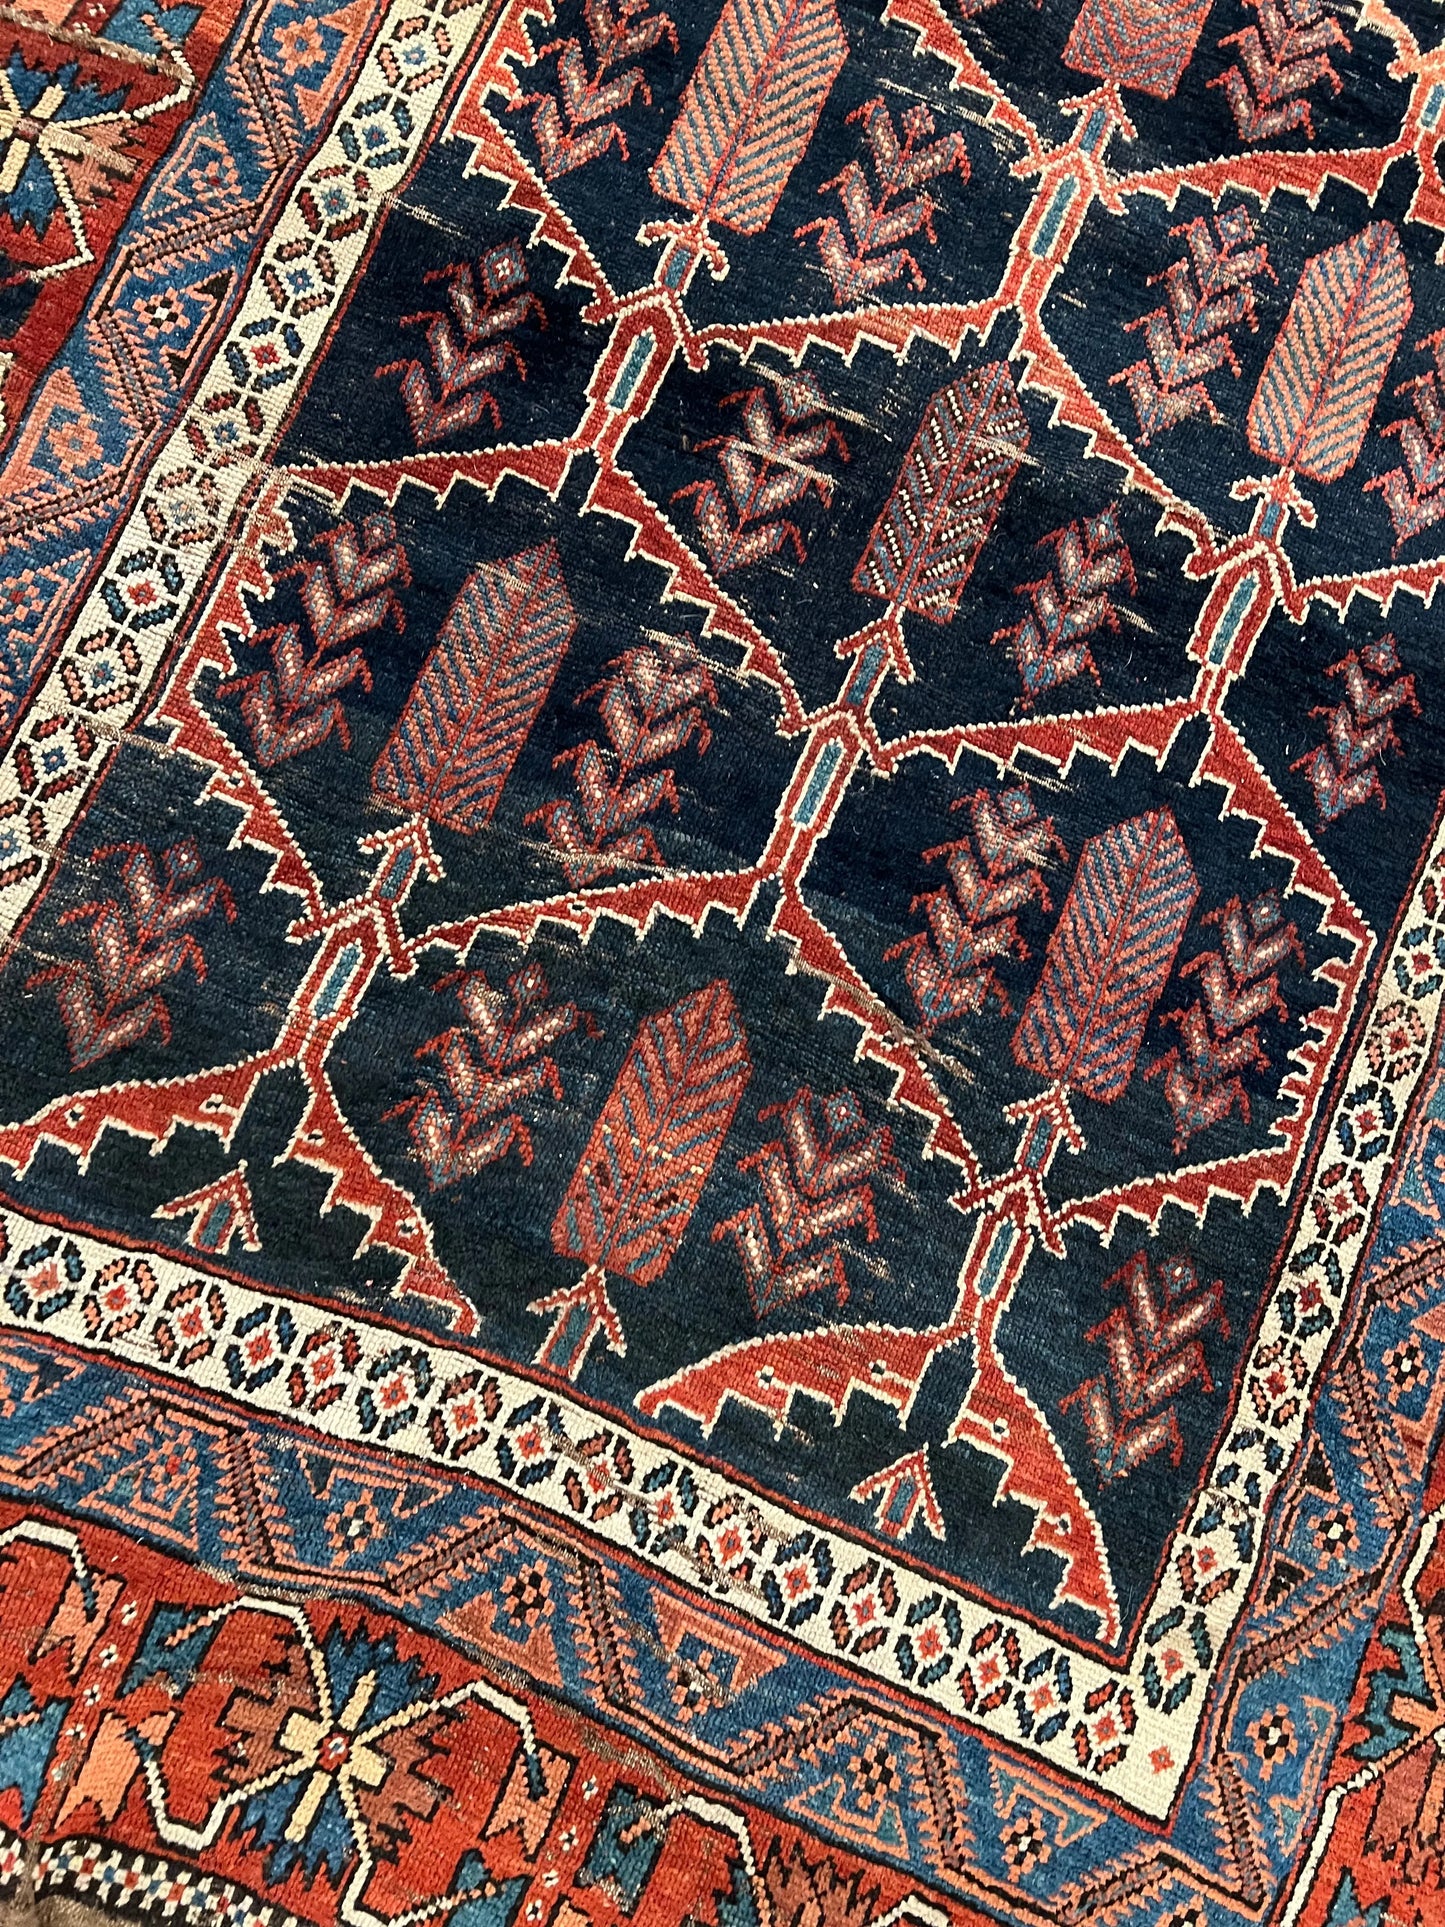 On hold for Greg - Antique Persian Afshar Rug | 7’ 4" x 5’ Rug the Rock